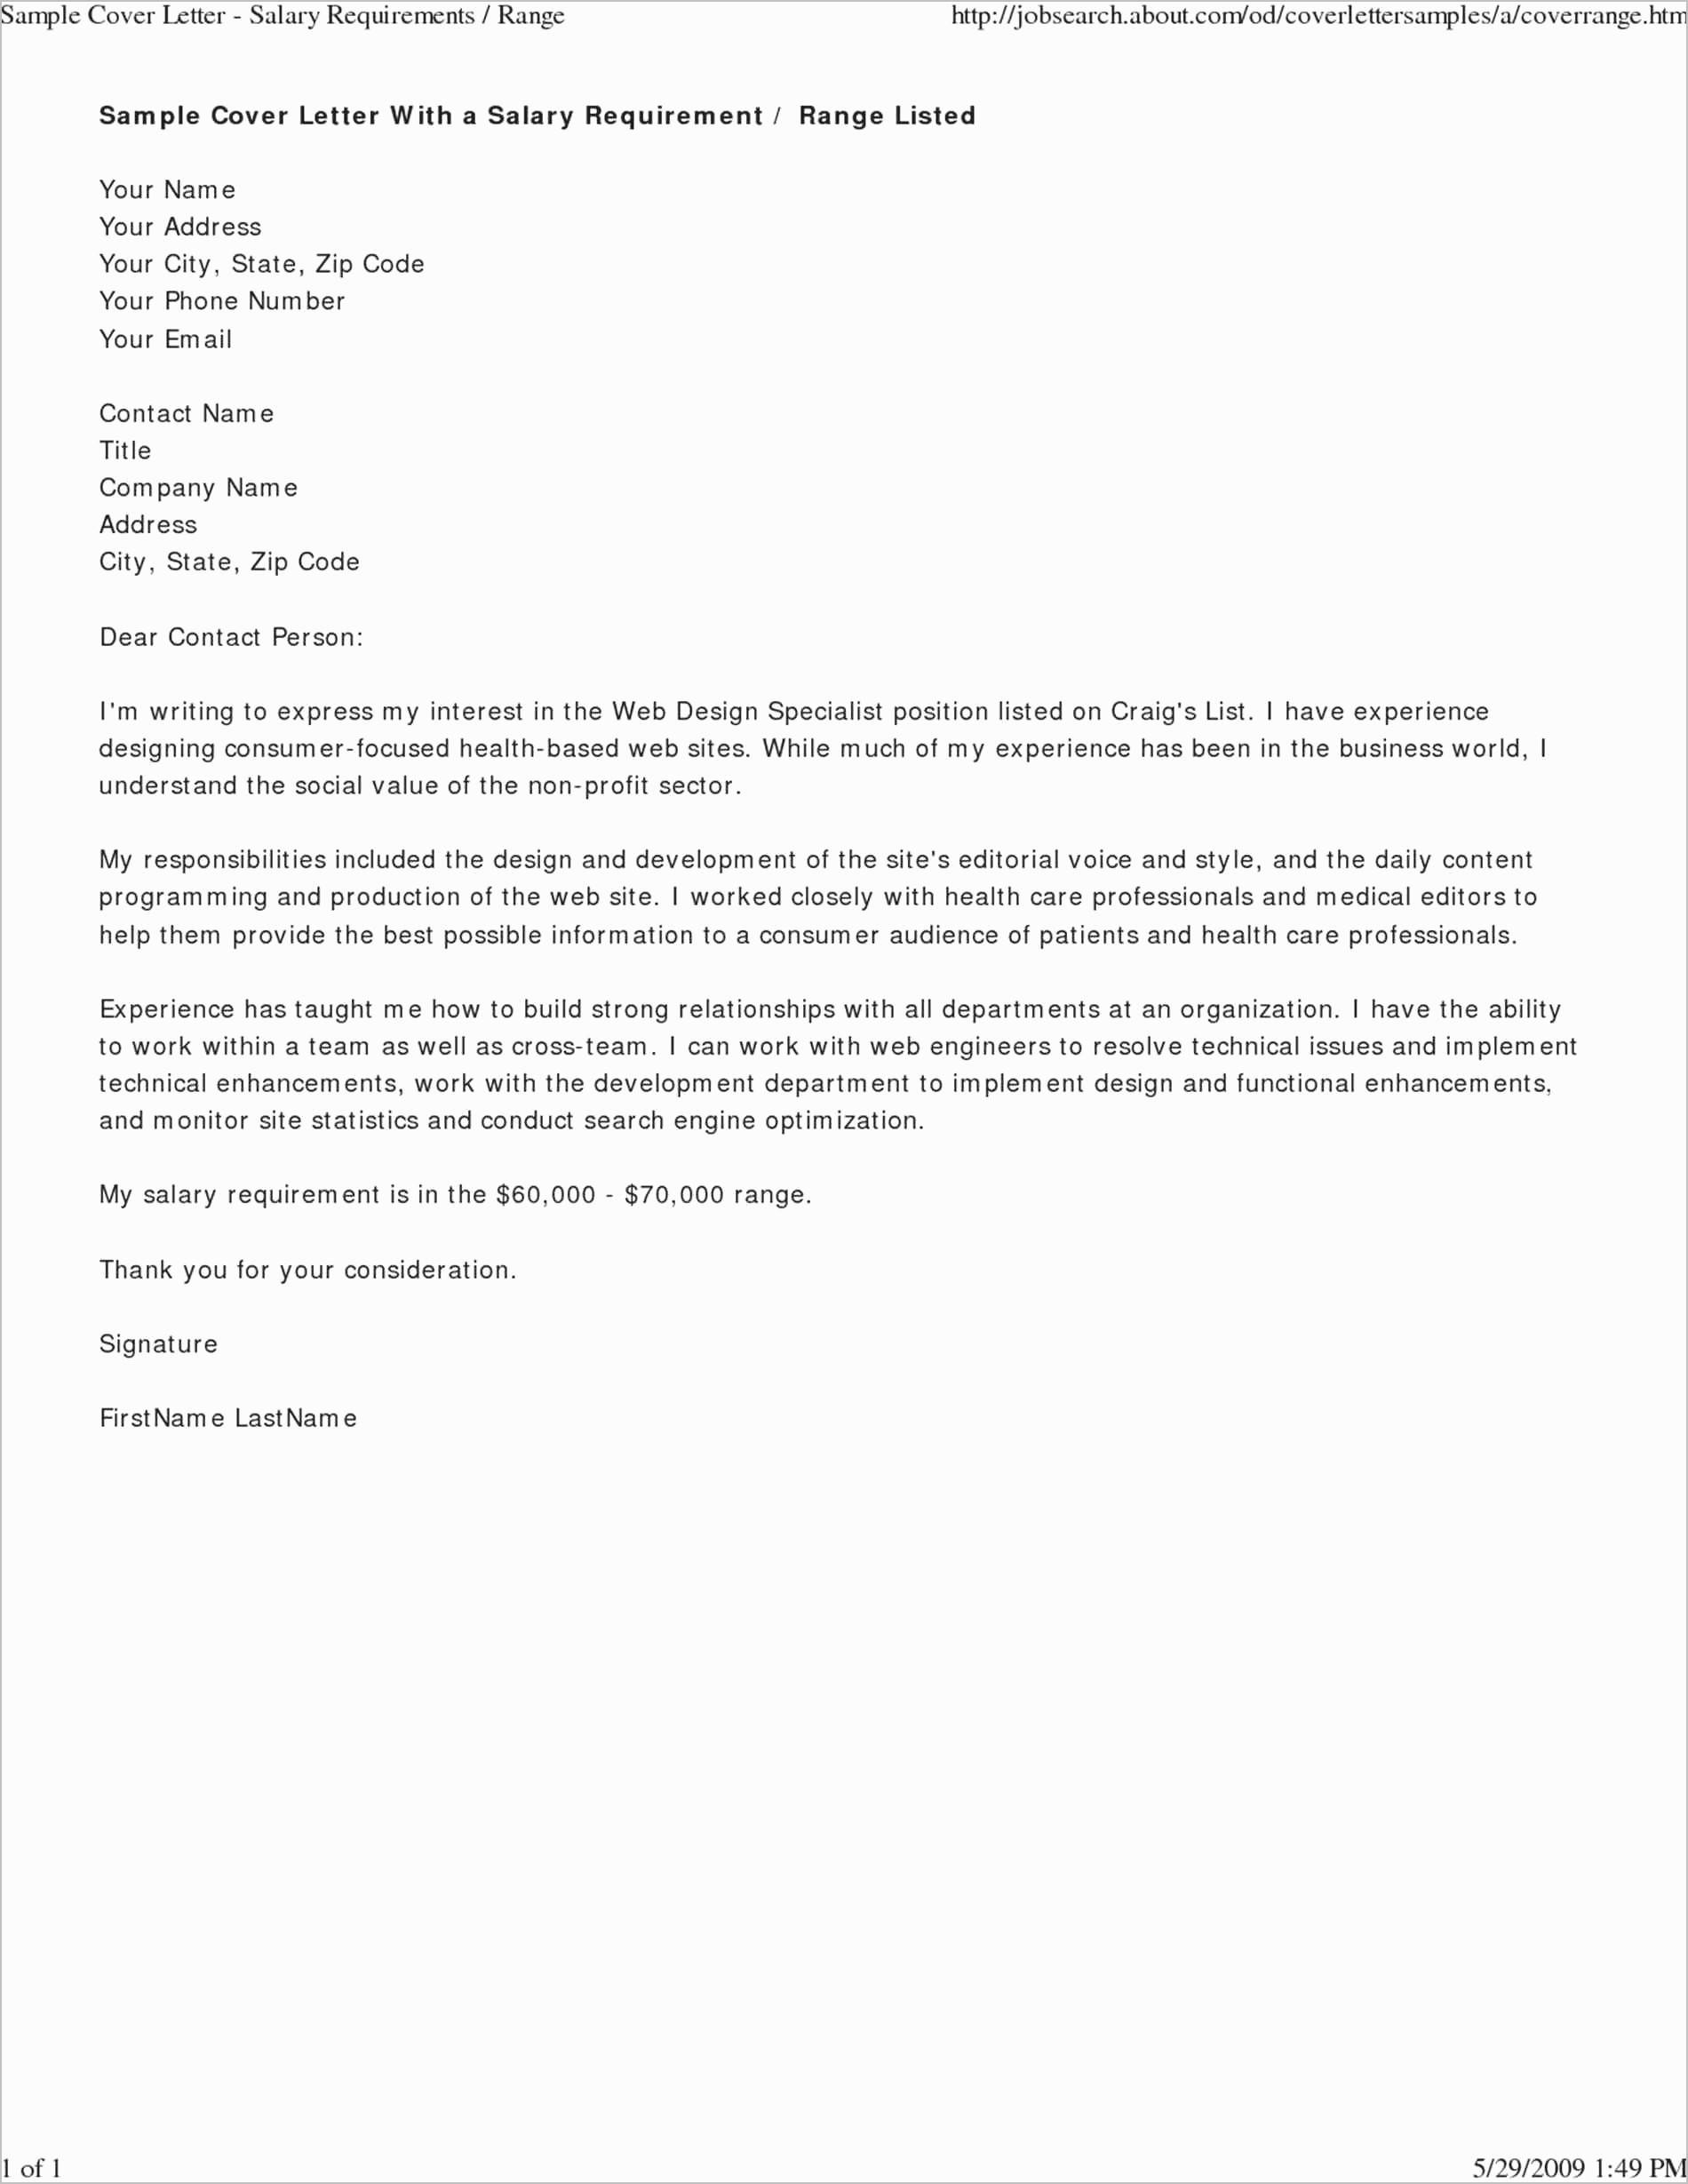 jimmy sweeney cover letter template Collection-Jimmy Sweeney Cover Letter Examples Beautiful Unique Cover Letters Pdf format 15-g